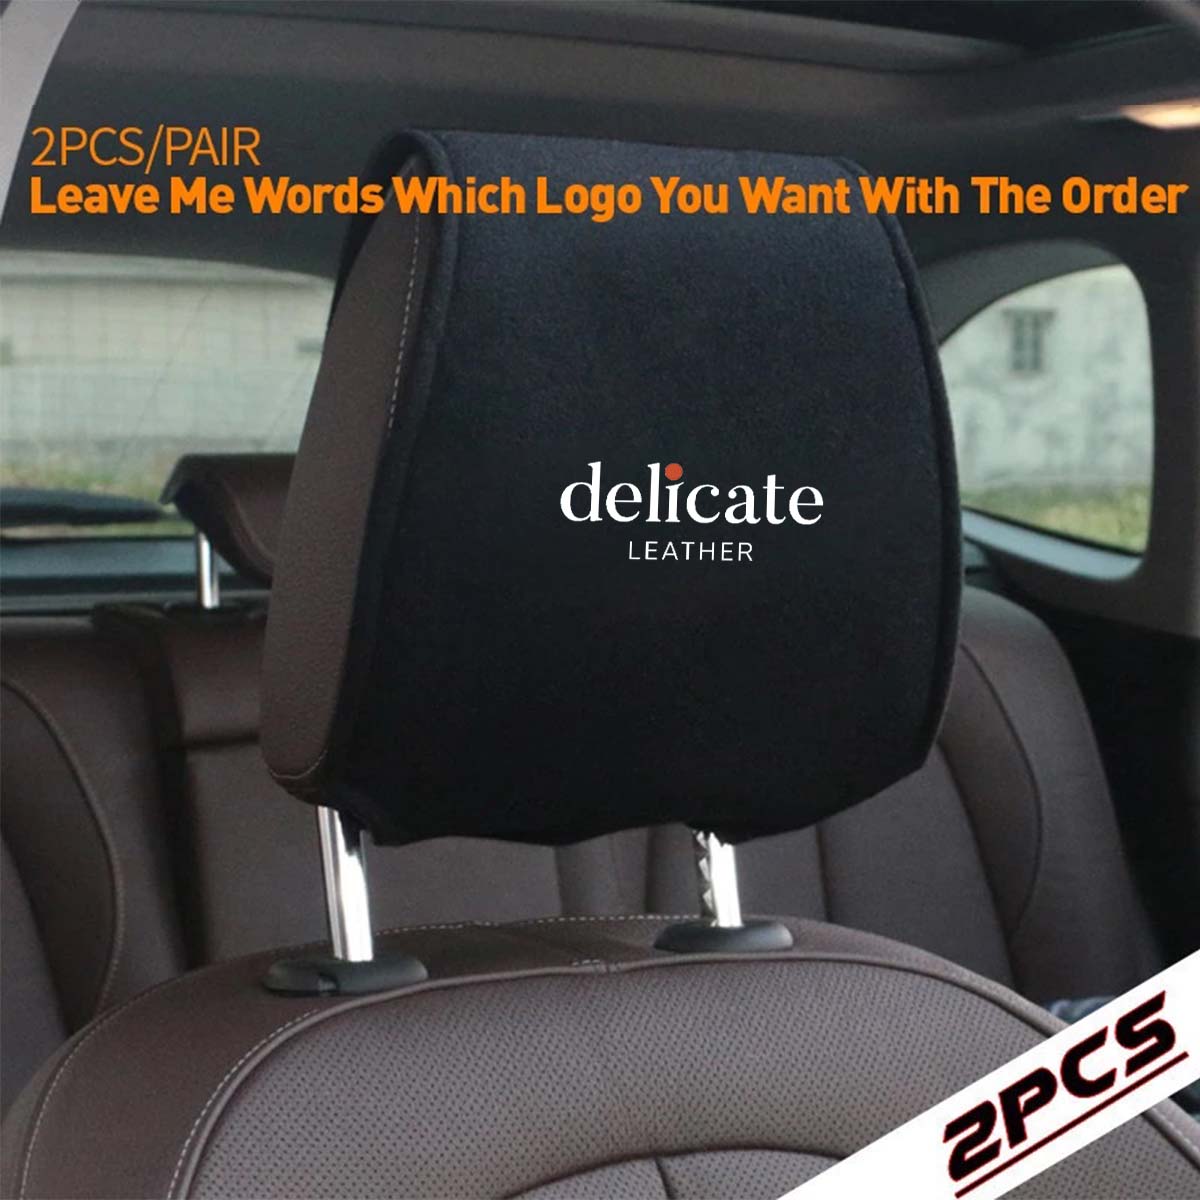 Delicate Leather Car Seat Headrest Cover: Stylish Protection